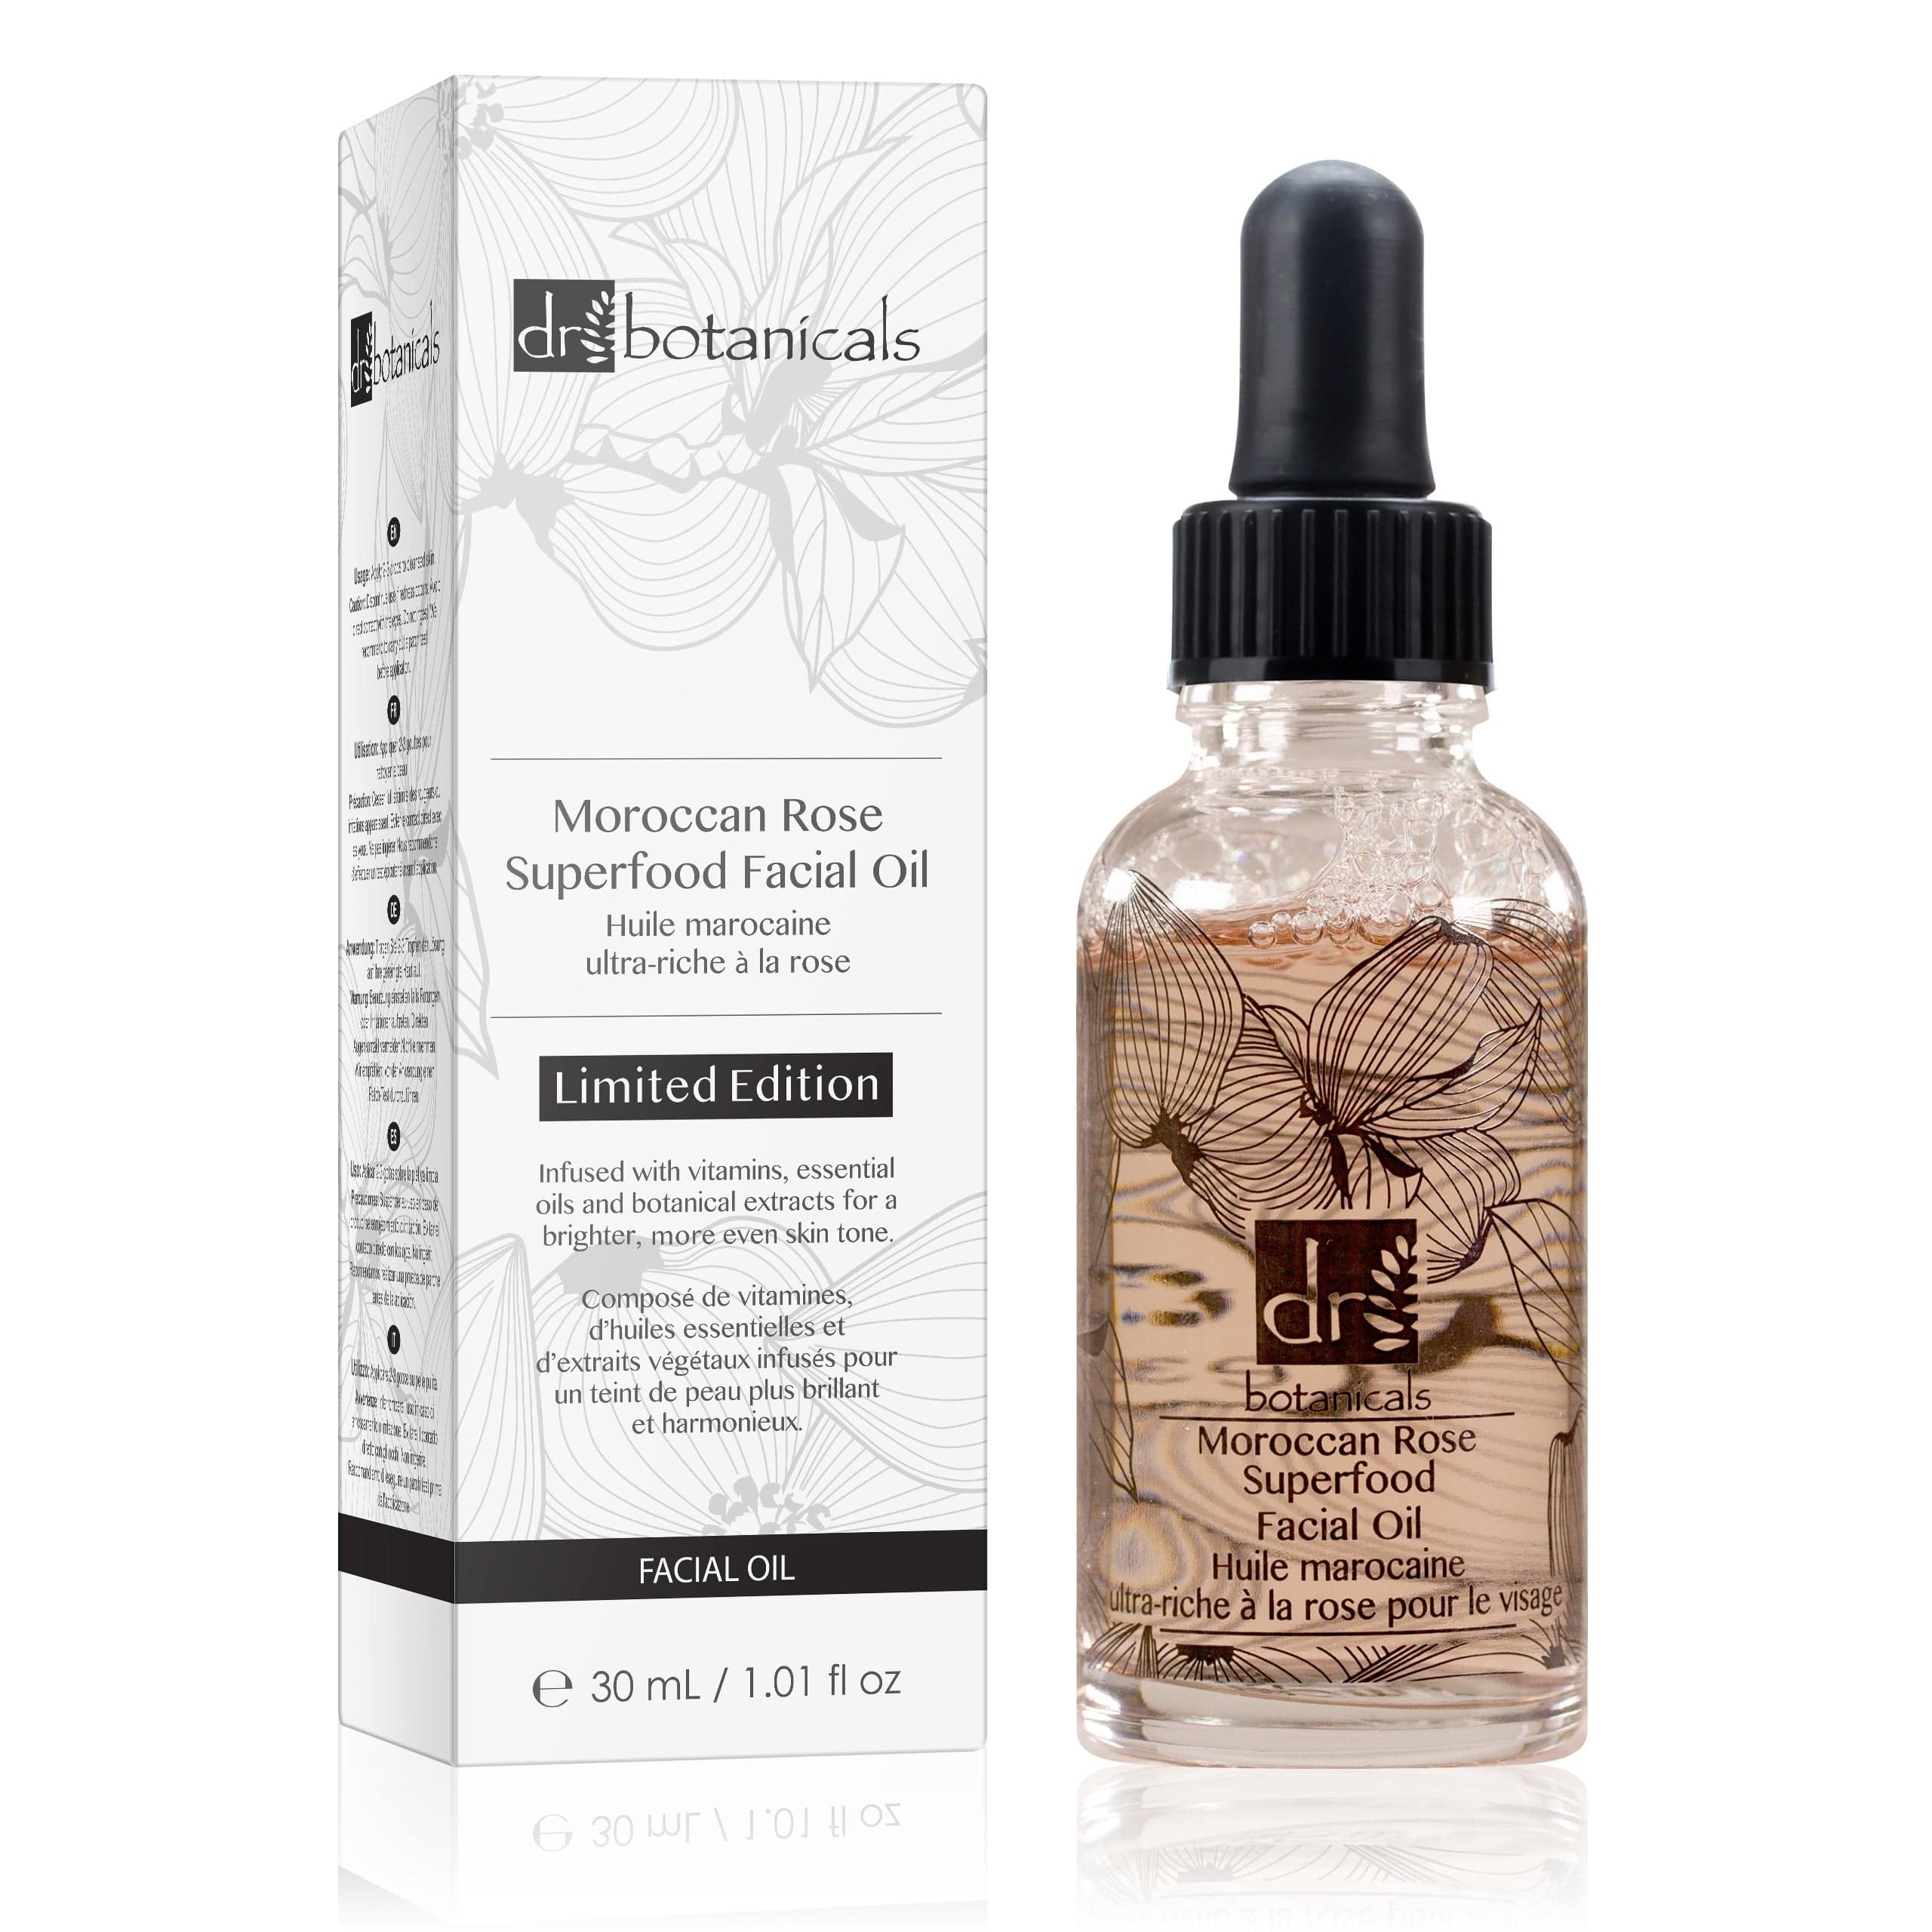 Moroccan Rose Superfood Facial Oil 30ml Limited Edition Rose Bottle